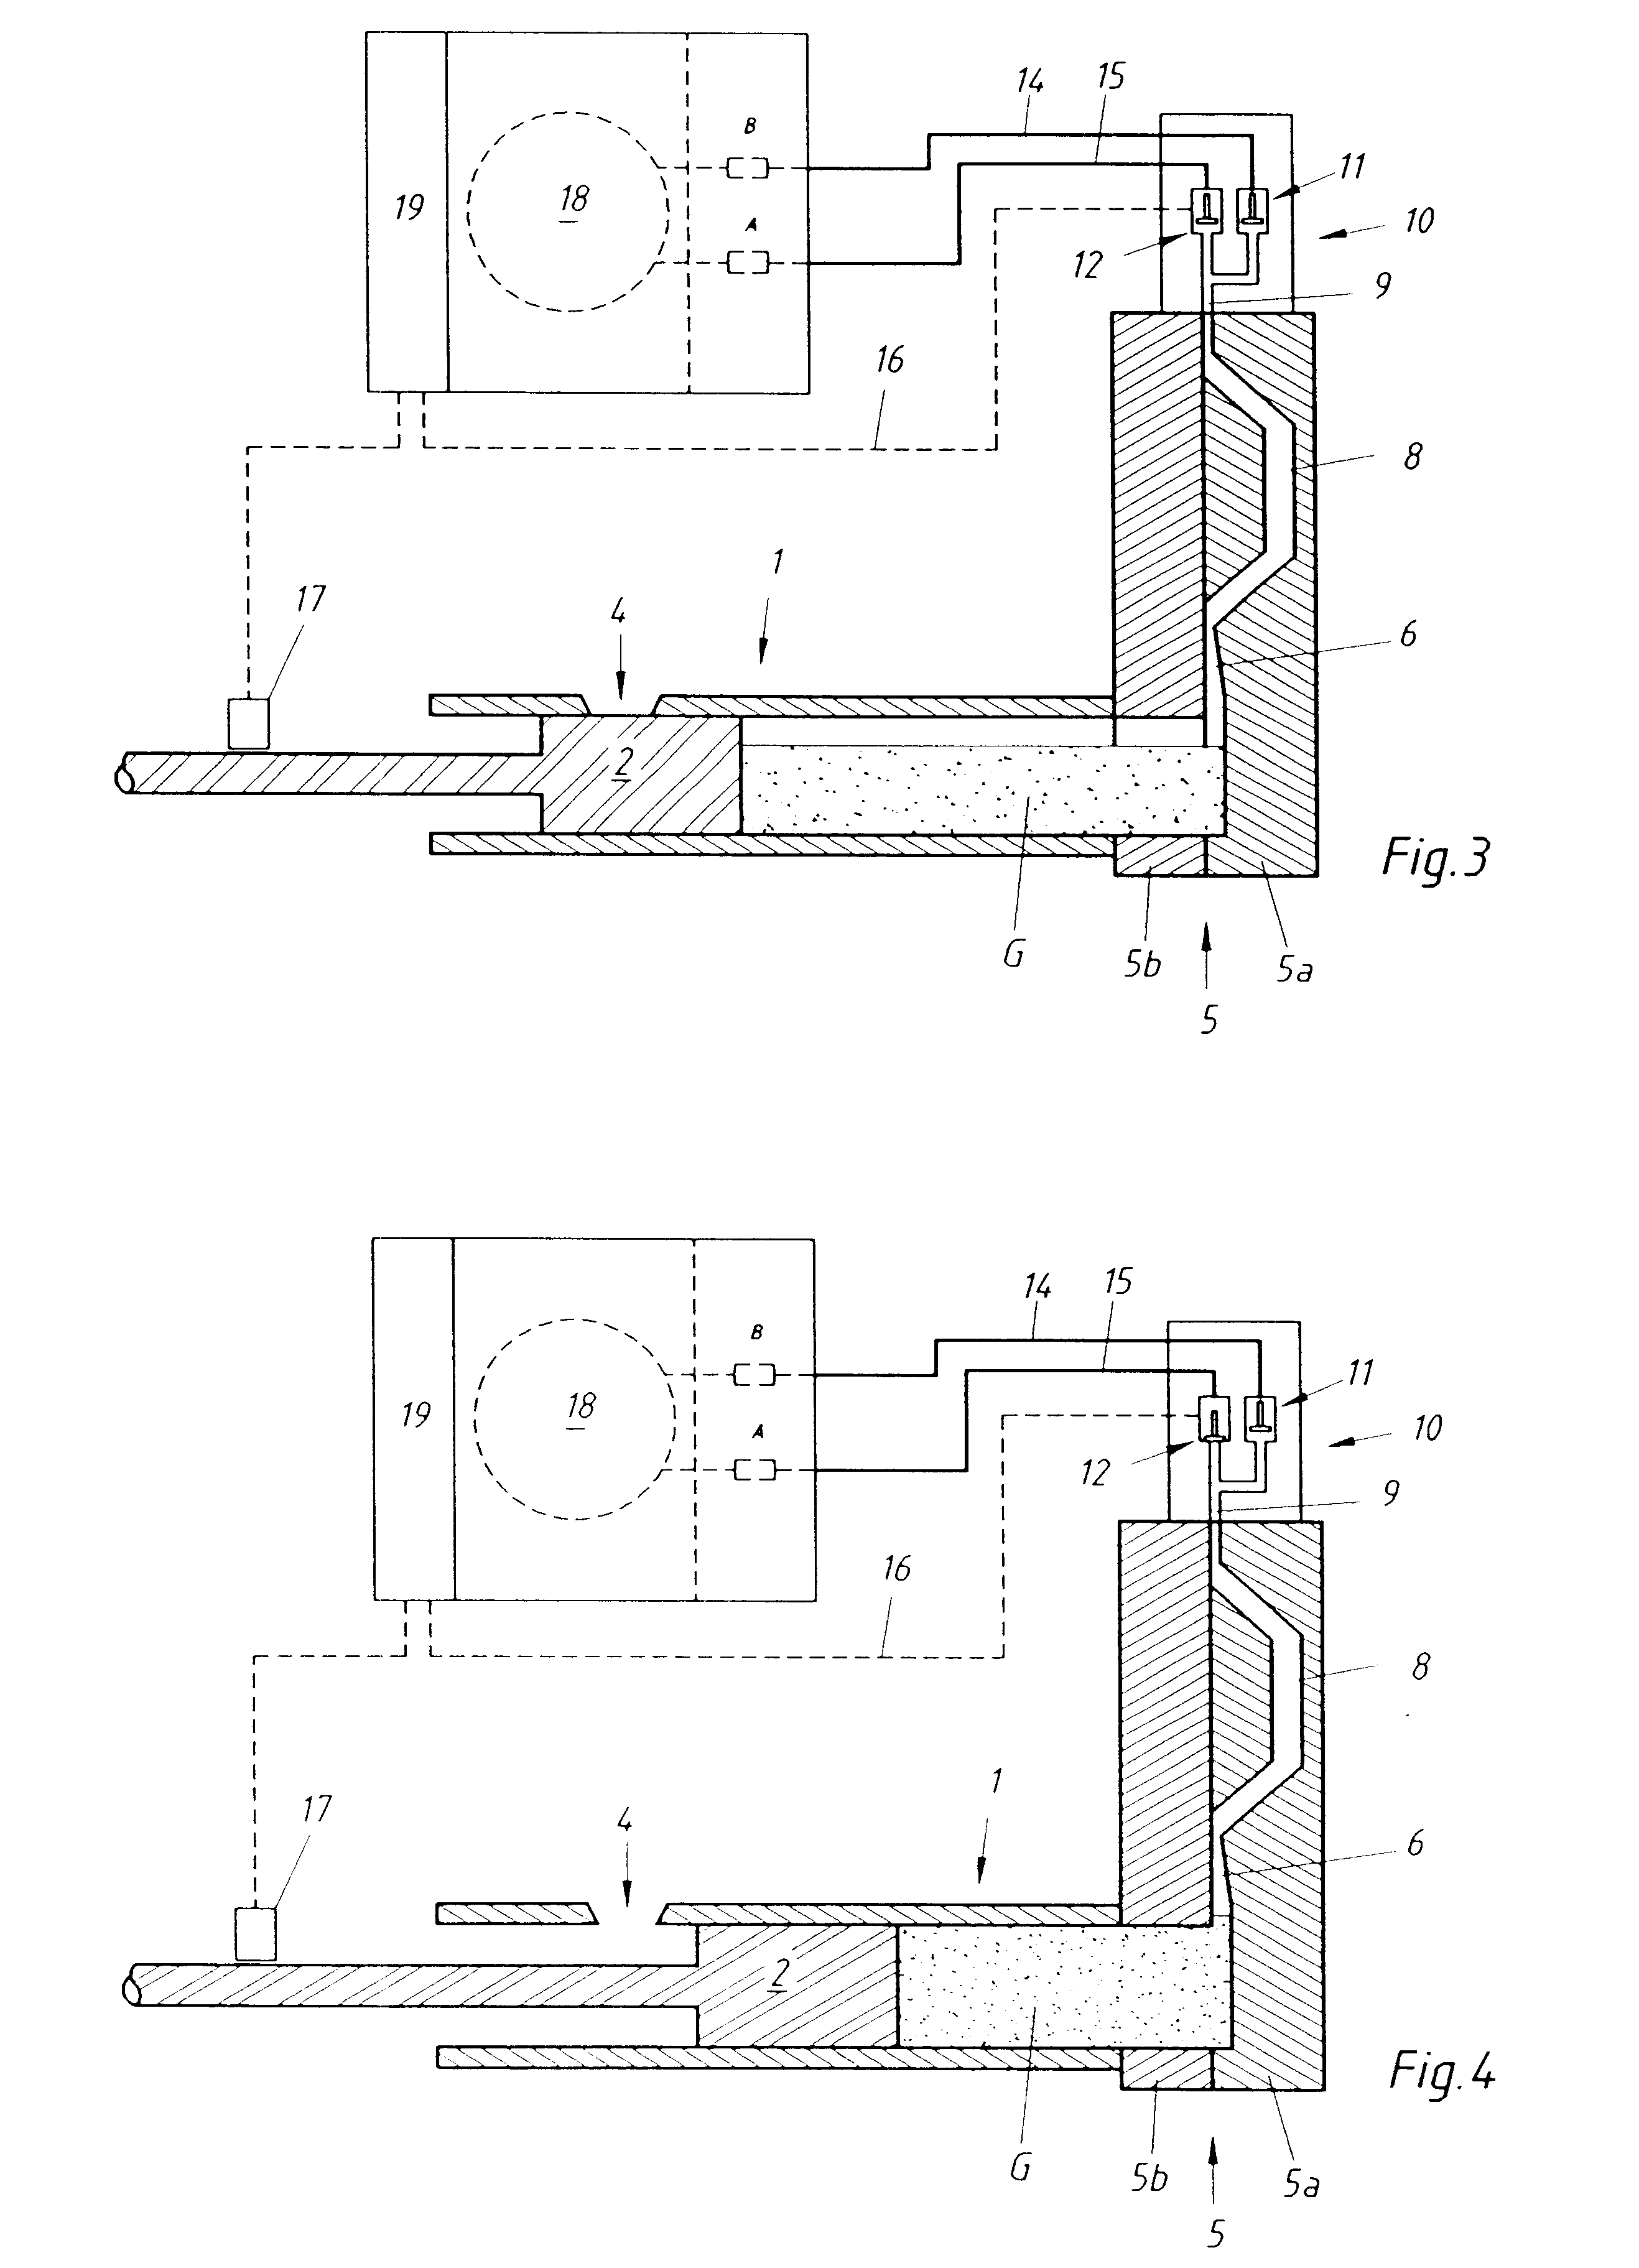 Method and apparatus for venting a diecasting mould of a diecasing machine